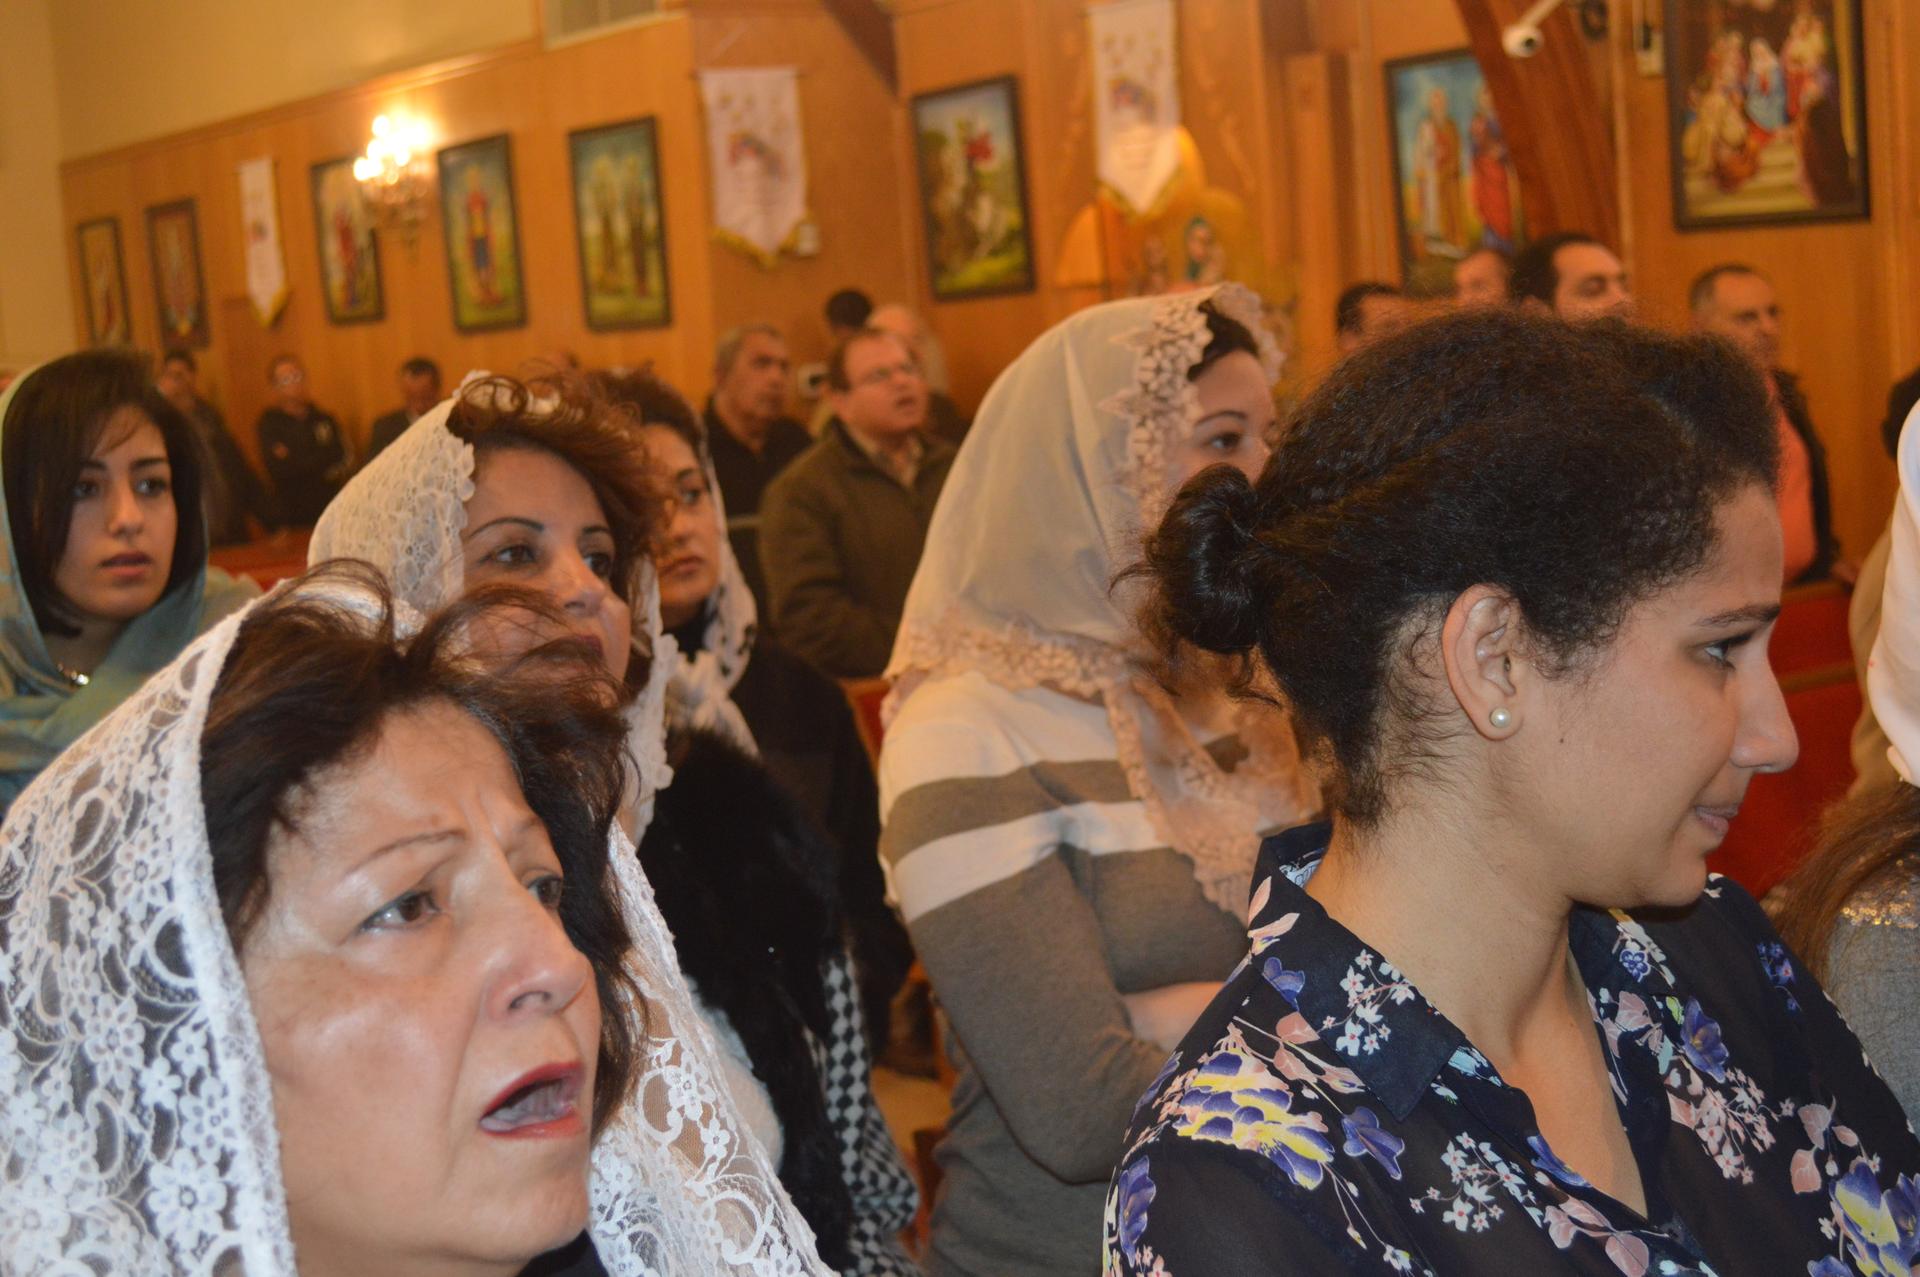 During Sunday worship at St. Antonius Coptic Church in Hayward, California, women sit on one side of the church, and men on the other.  